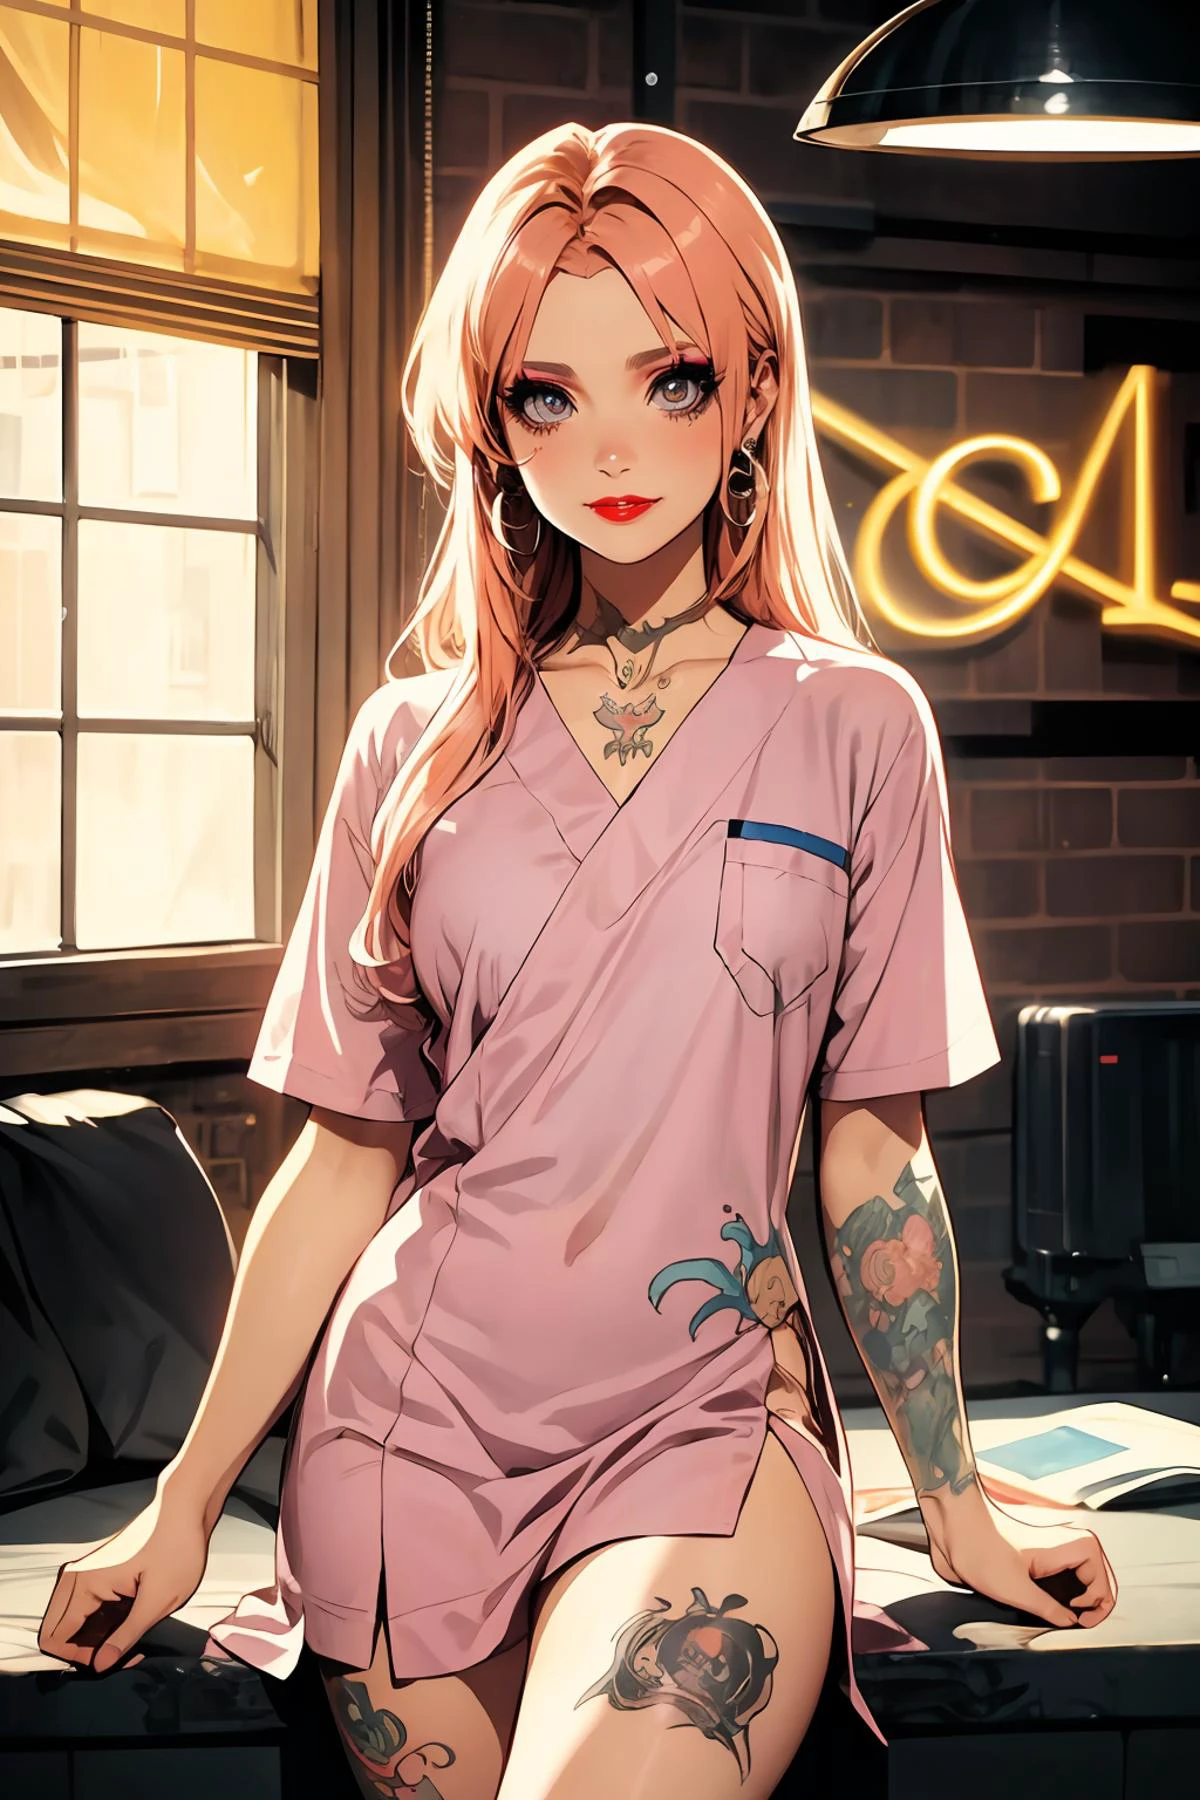 8k high quality detailed,highres,anime,comic,detailed image,
(an illustration of a teenage girl posing,(an illustration of girl,teenage girl)),(magazine_illustration),
(1girl,asian_female,orange hair, long hair, swept bangs, pink eyes, muscular female, medium breasts,(Wistful Smile):0.85),(, m3t0,makeup,eyeshadow,red lipstick,tattoo),detailed_face,
((Leaning back with arms outstretched,):0.8),
((, hospital gown,v-collar):0.85),(,realistic clothing texture,realistic_skin_texture),